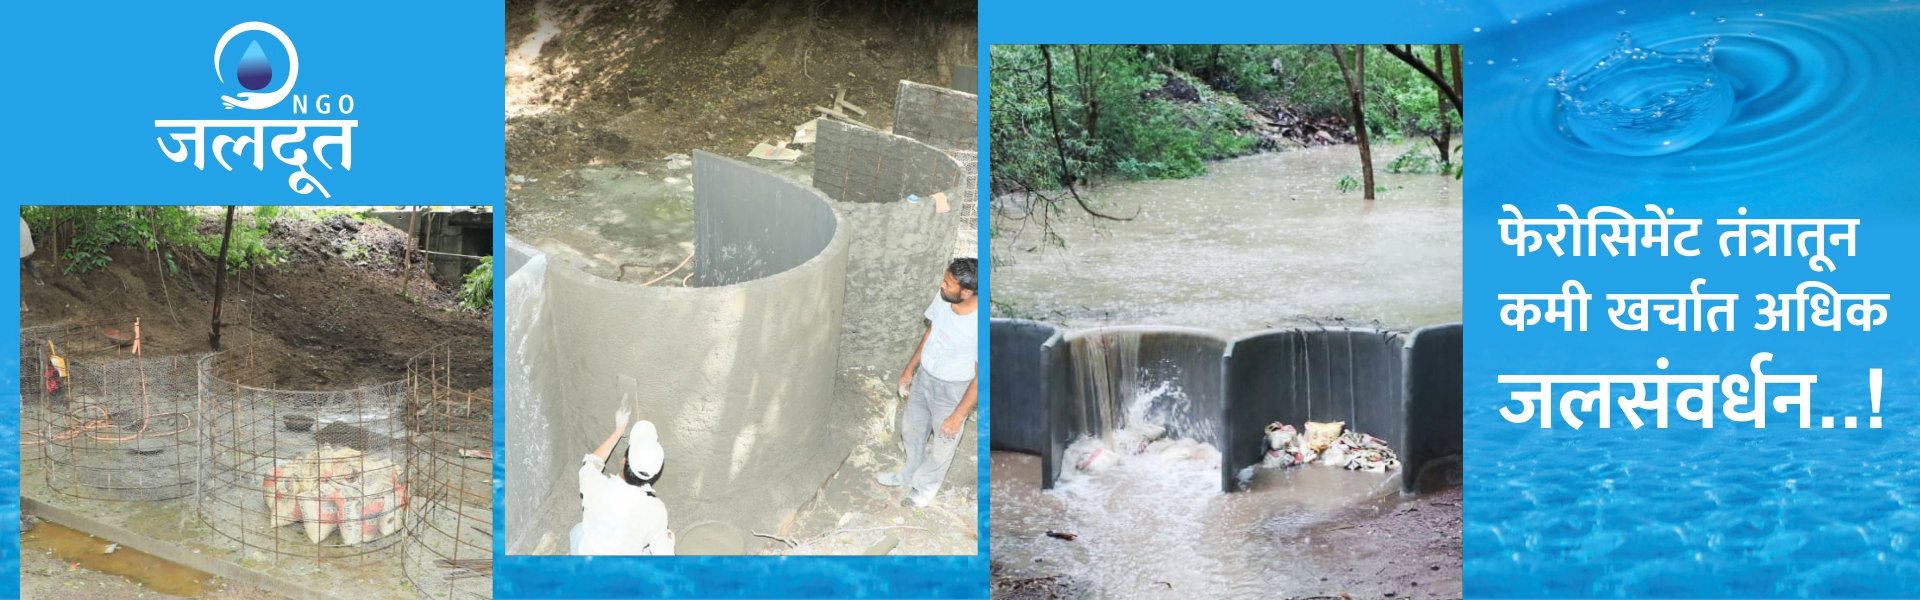 jaldoot-organization-has-created-ferocement-technology-for-water-conservation-kishore-shitole